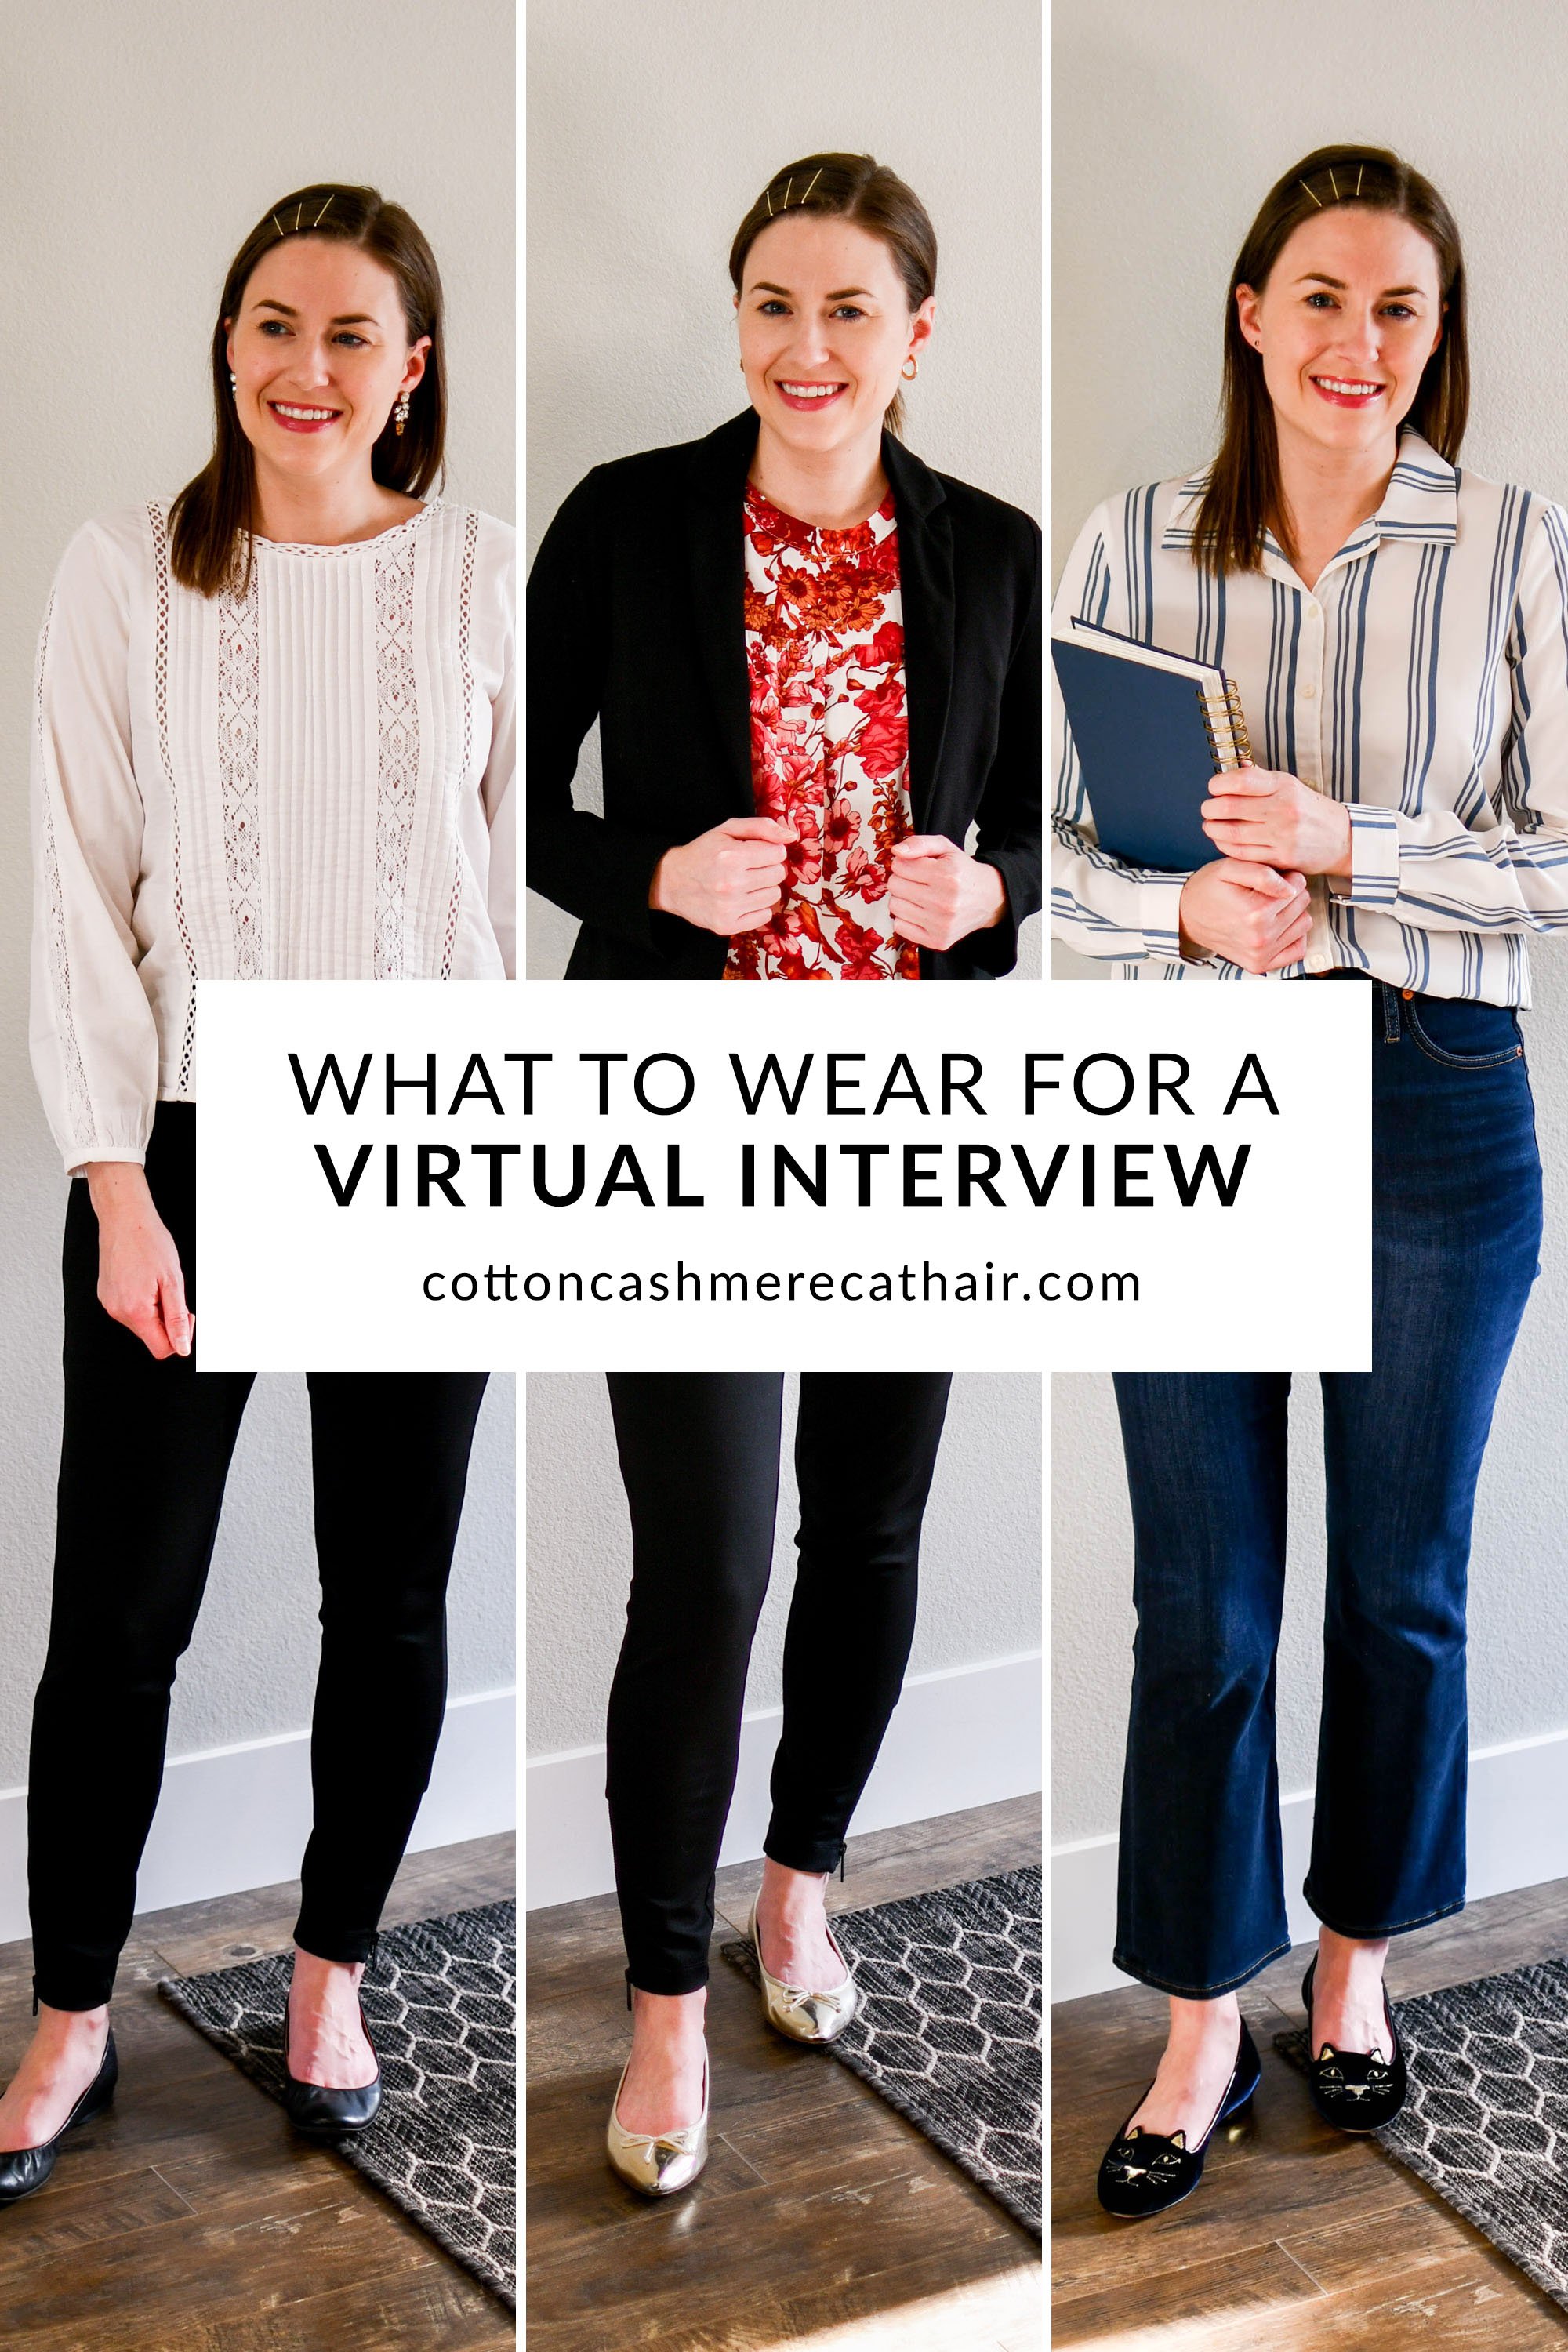 How to Dress for an Interview 